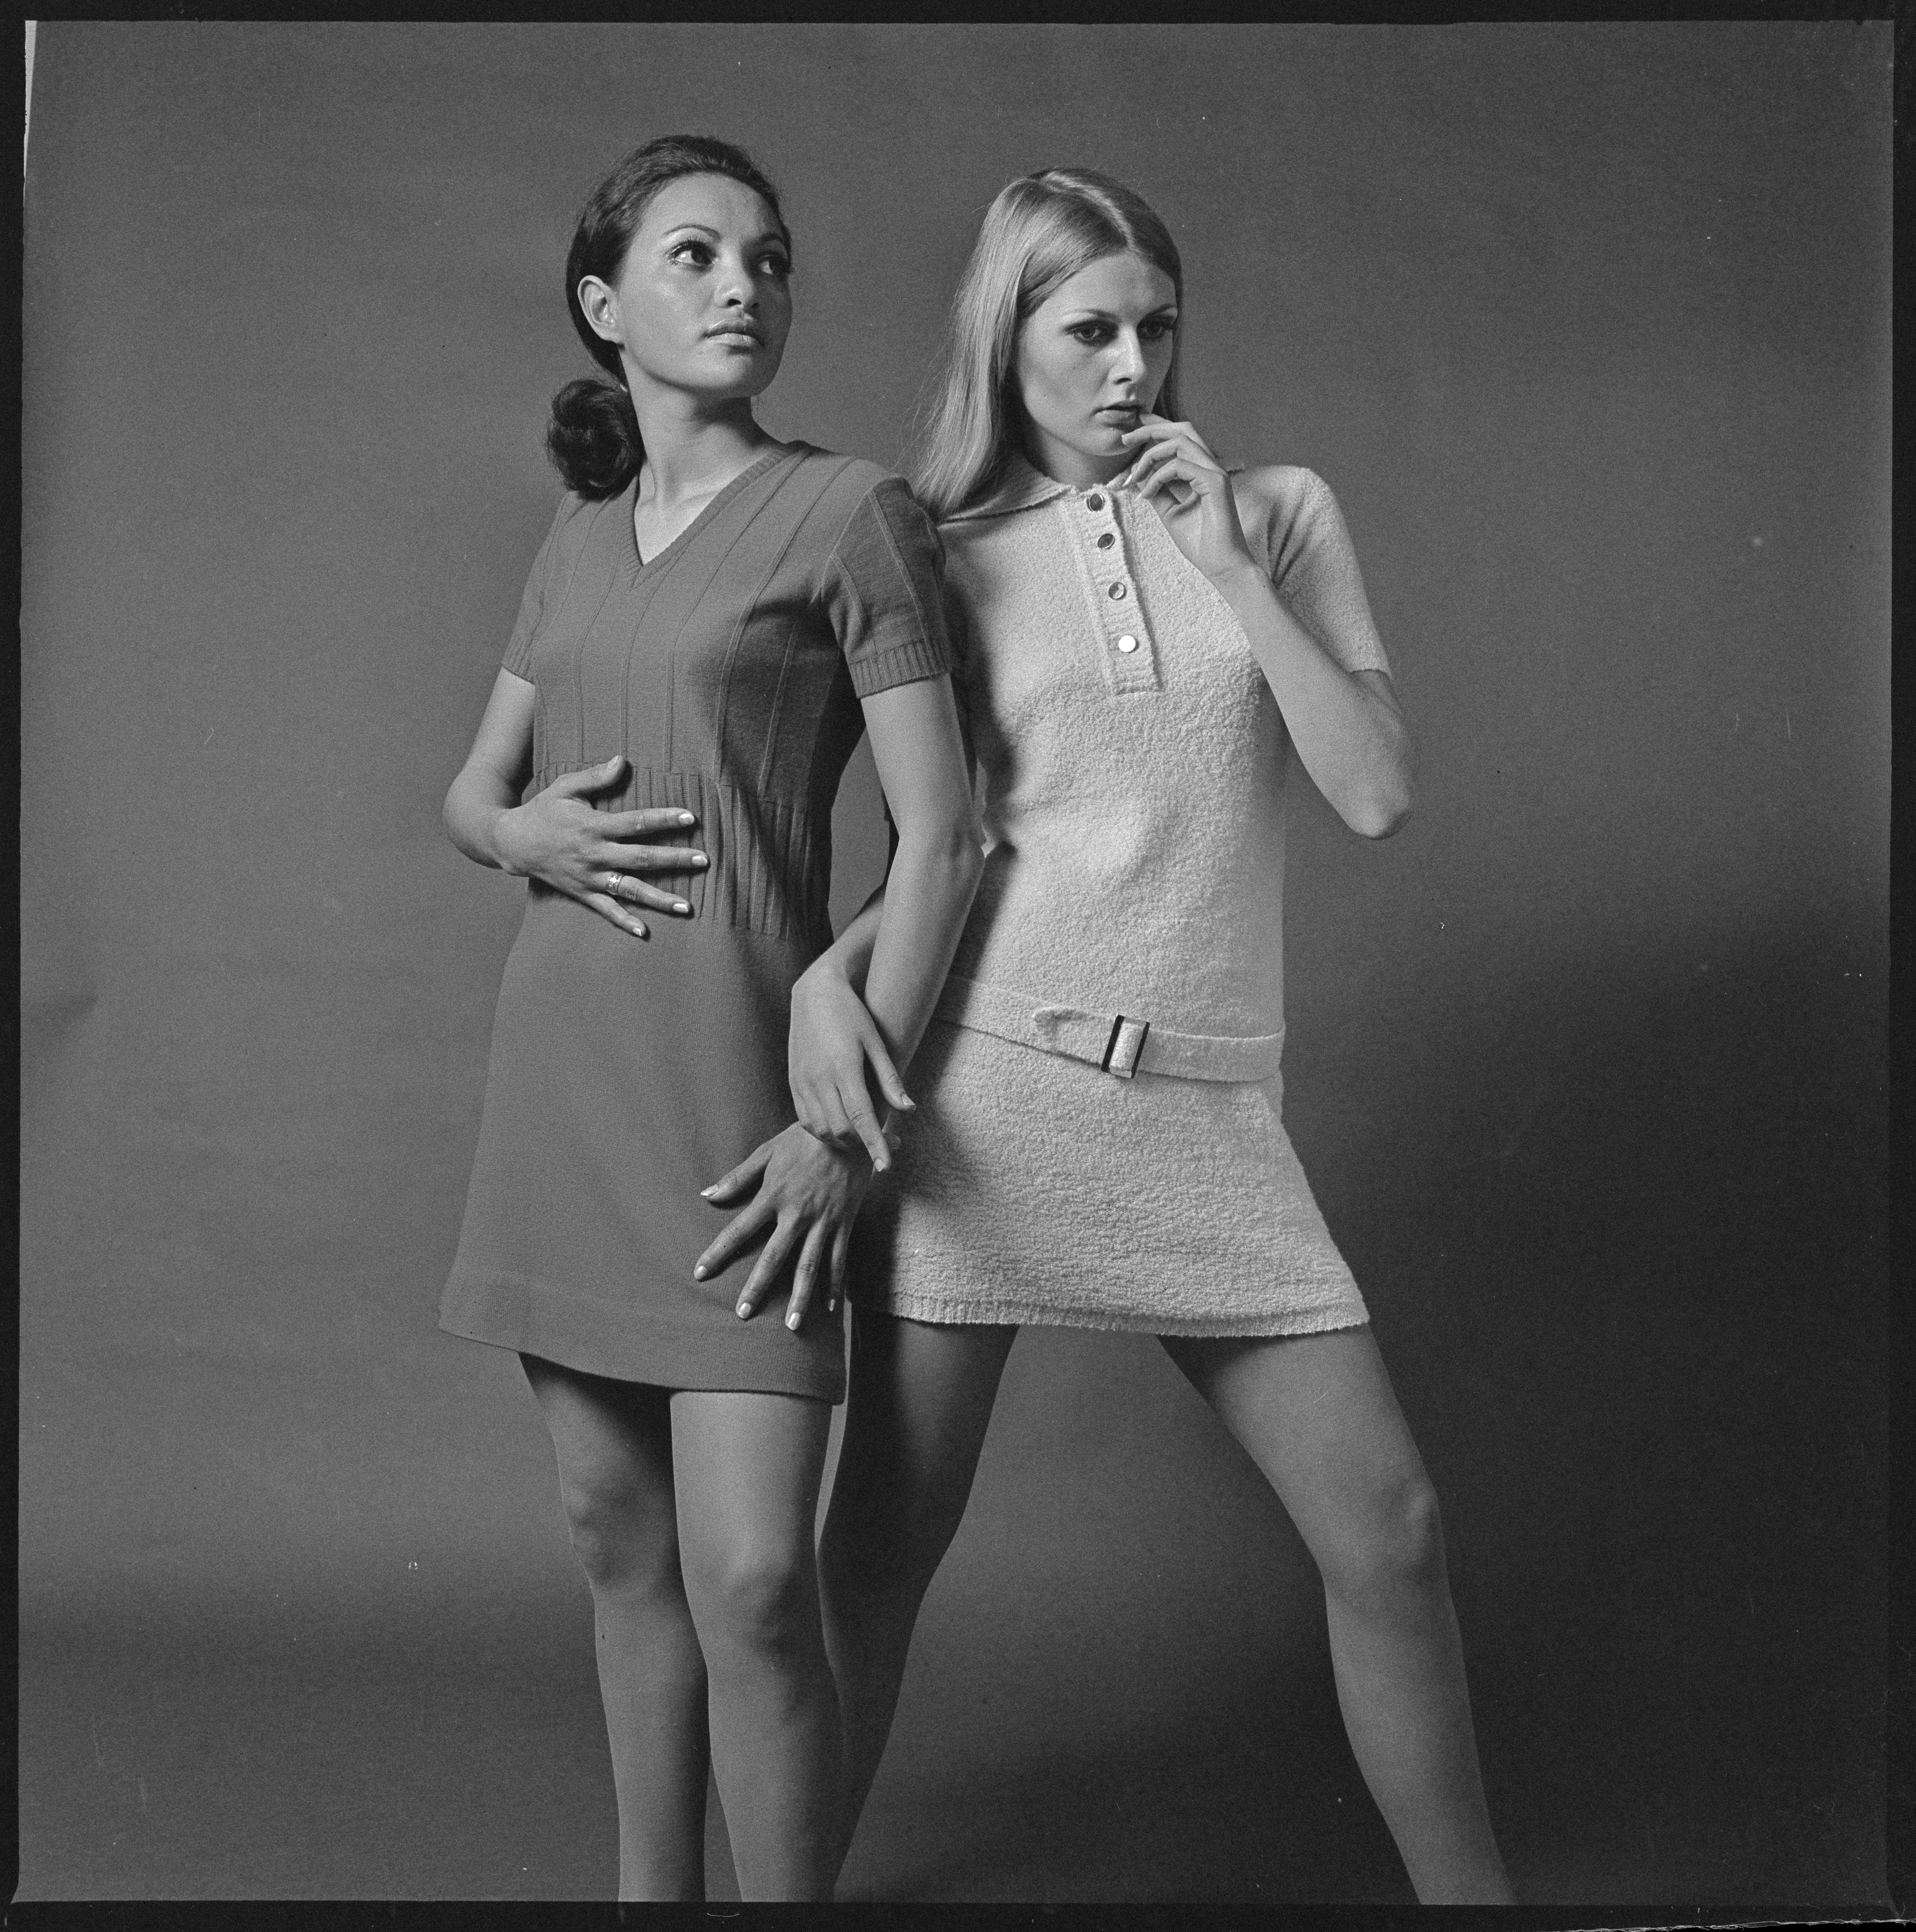 Noel Brotherston. Women modelling short-sleeved mini dresses, possibly Aotea Wakarua on the left, about 1960s. Auckland Libraries Heritage Collections, 1817-2139-09.